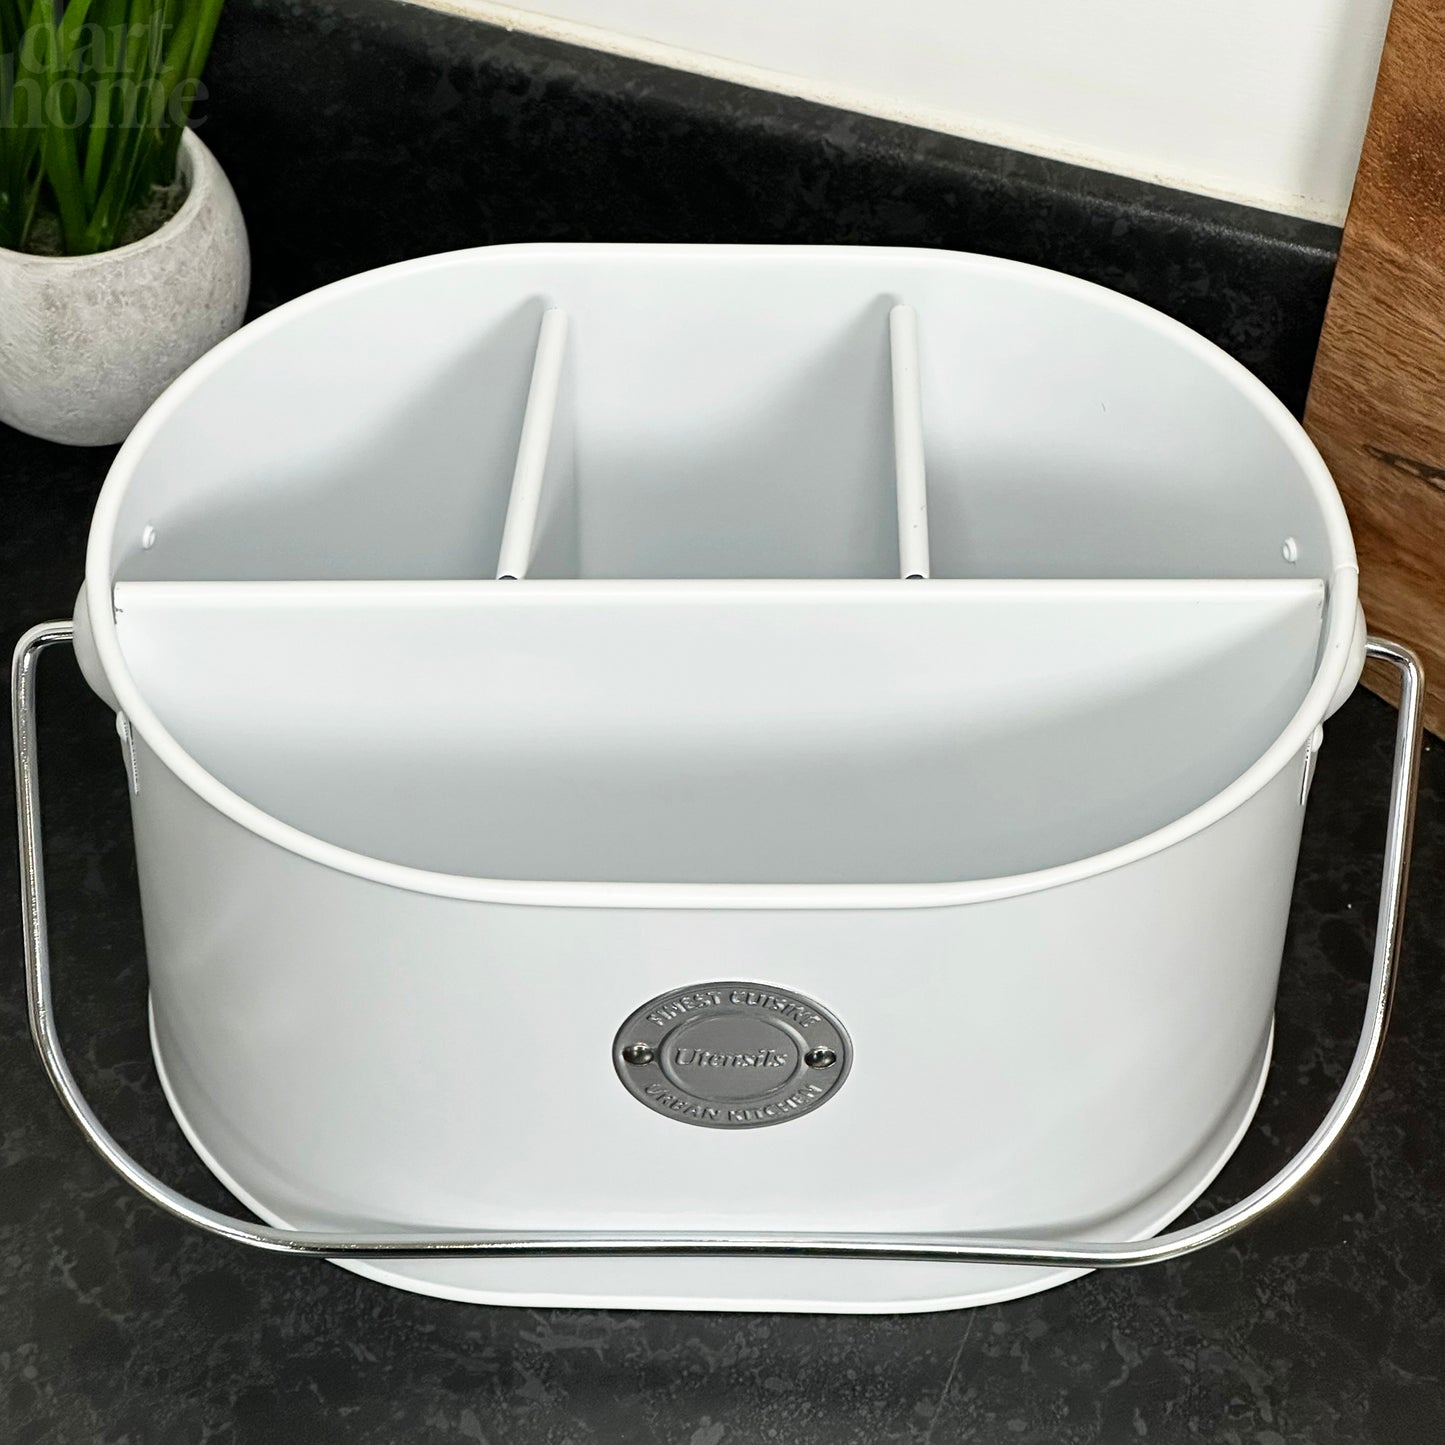 White 4 Compartment Table Caddy